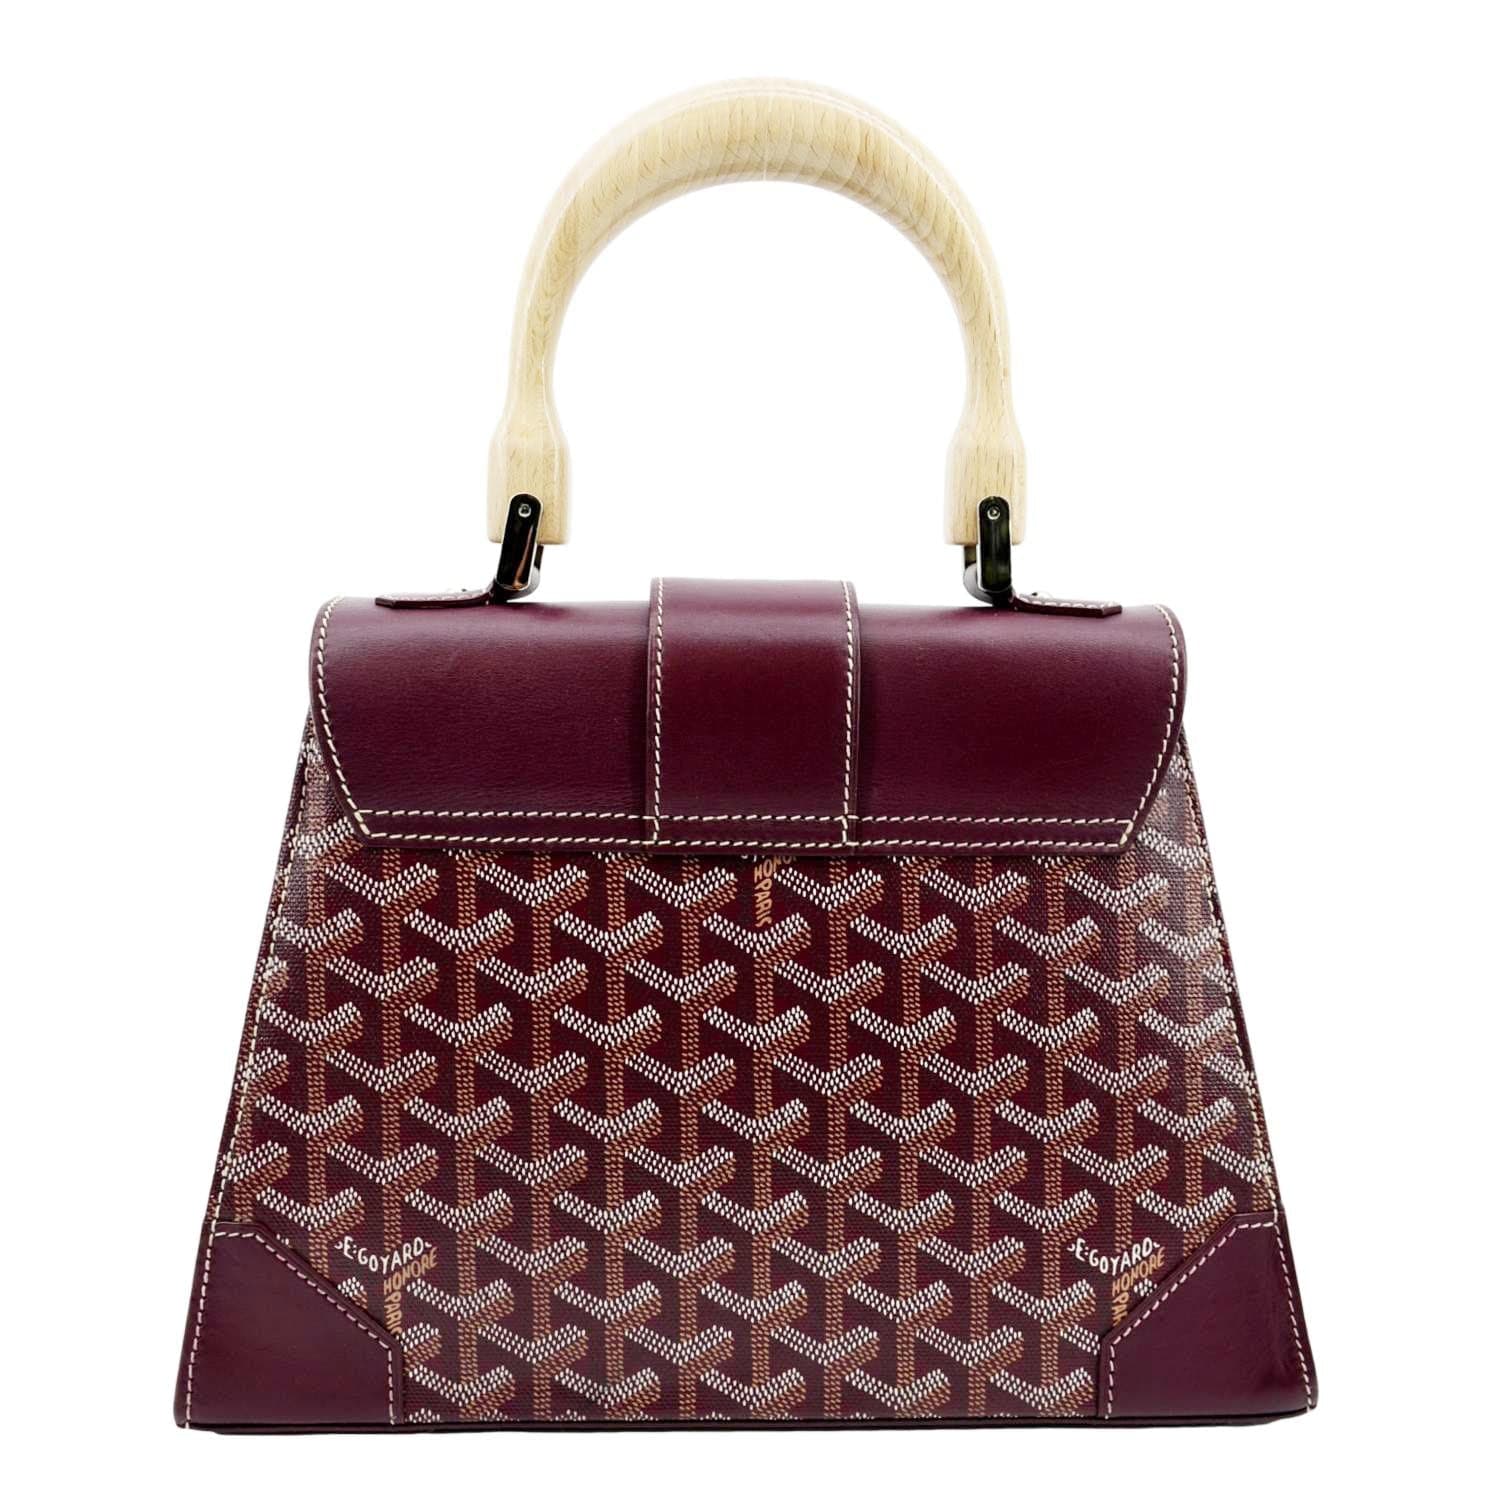 Goyard Red Bags & Handbags for Women, Authenticity Guaranteed